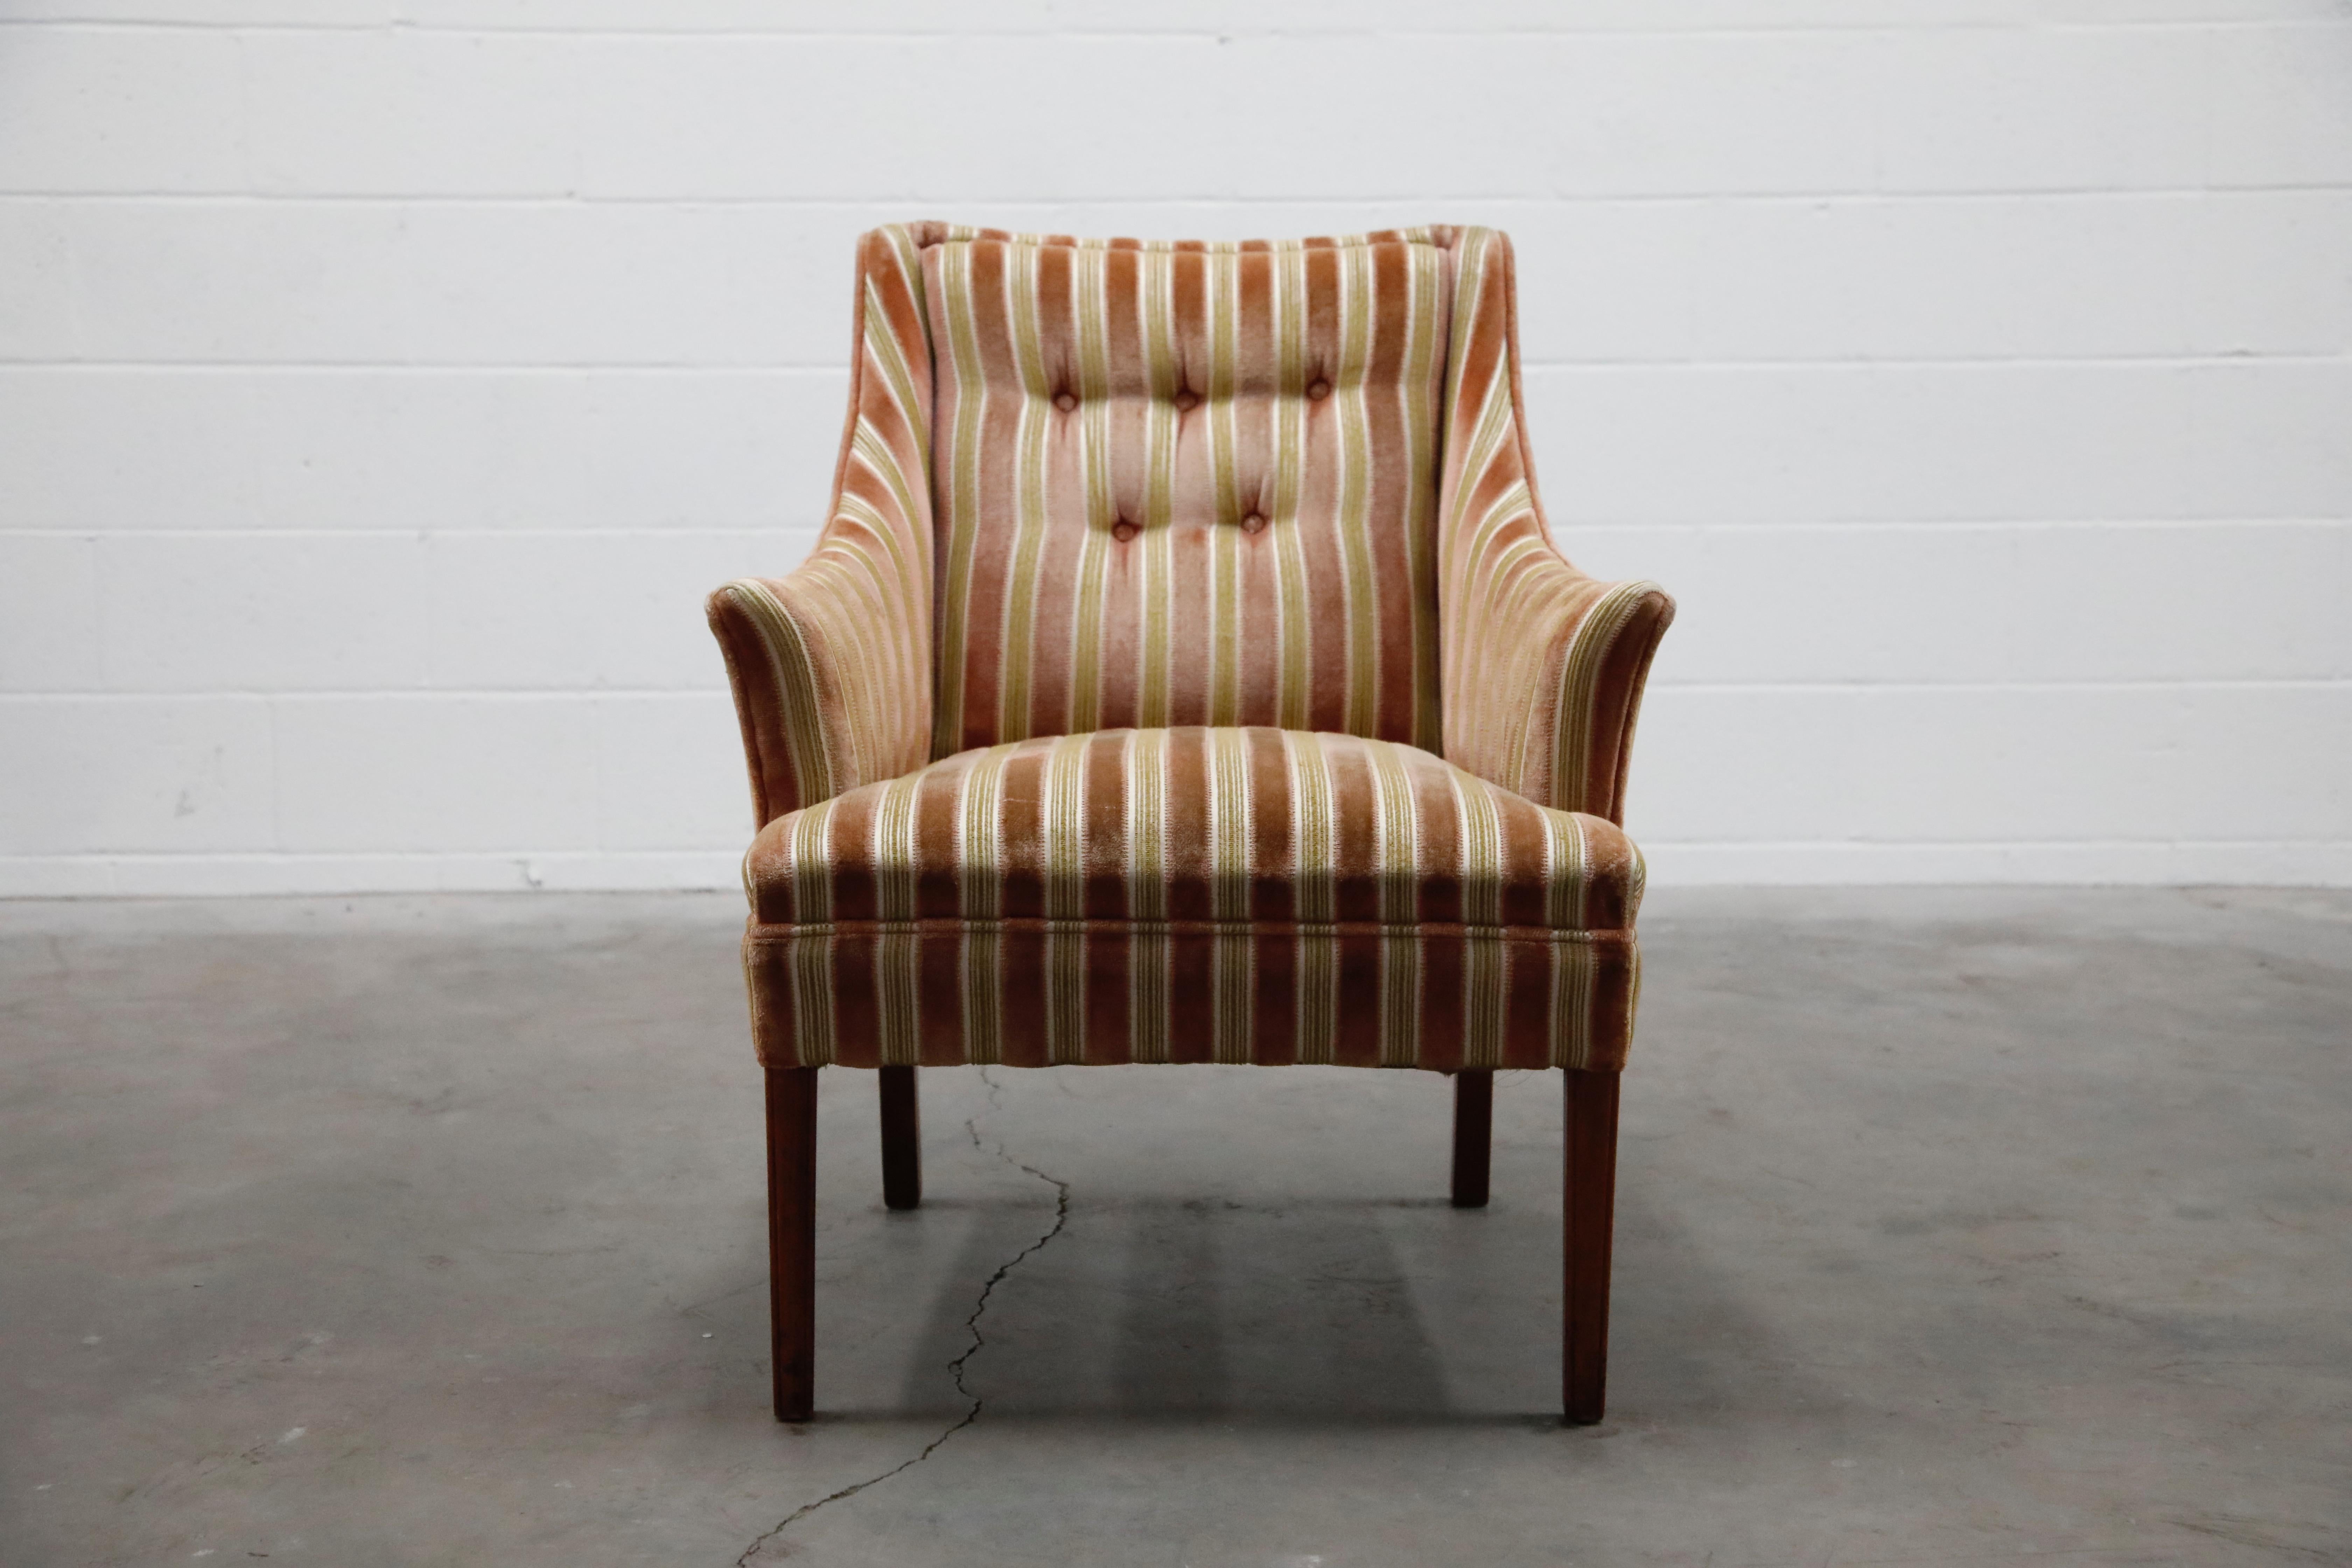 This lovely fireside armchair is upholstered in a beautiful soft striped velvet. Gorgeous striped colors of olive green, white and salmon pink. Sophisticated and classy, soft and cozy - this comfortable armchair is the perfect companion for a good